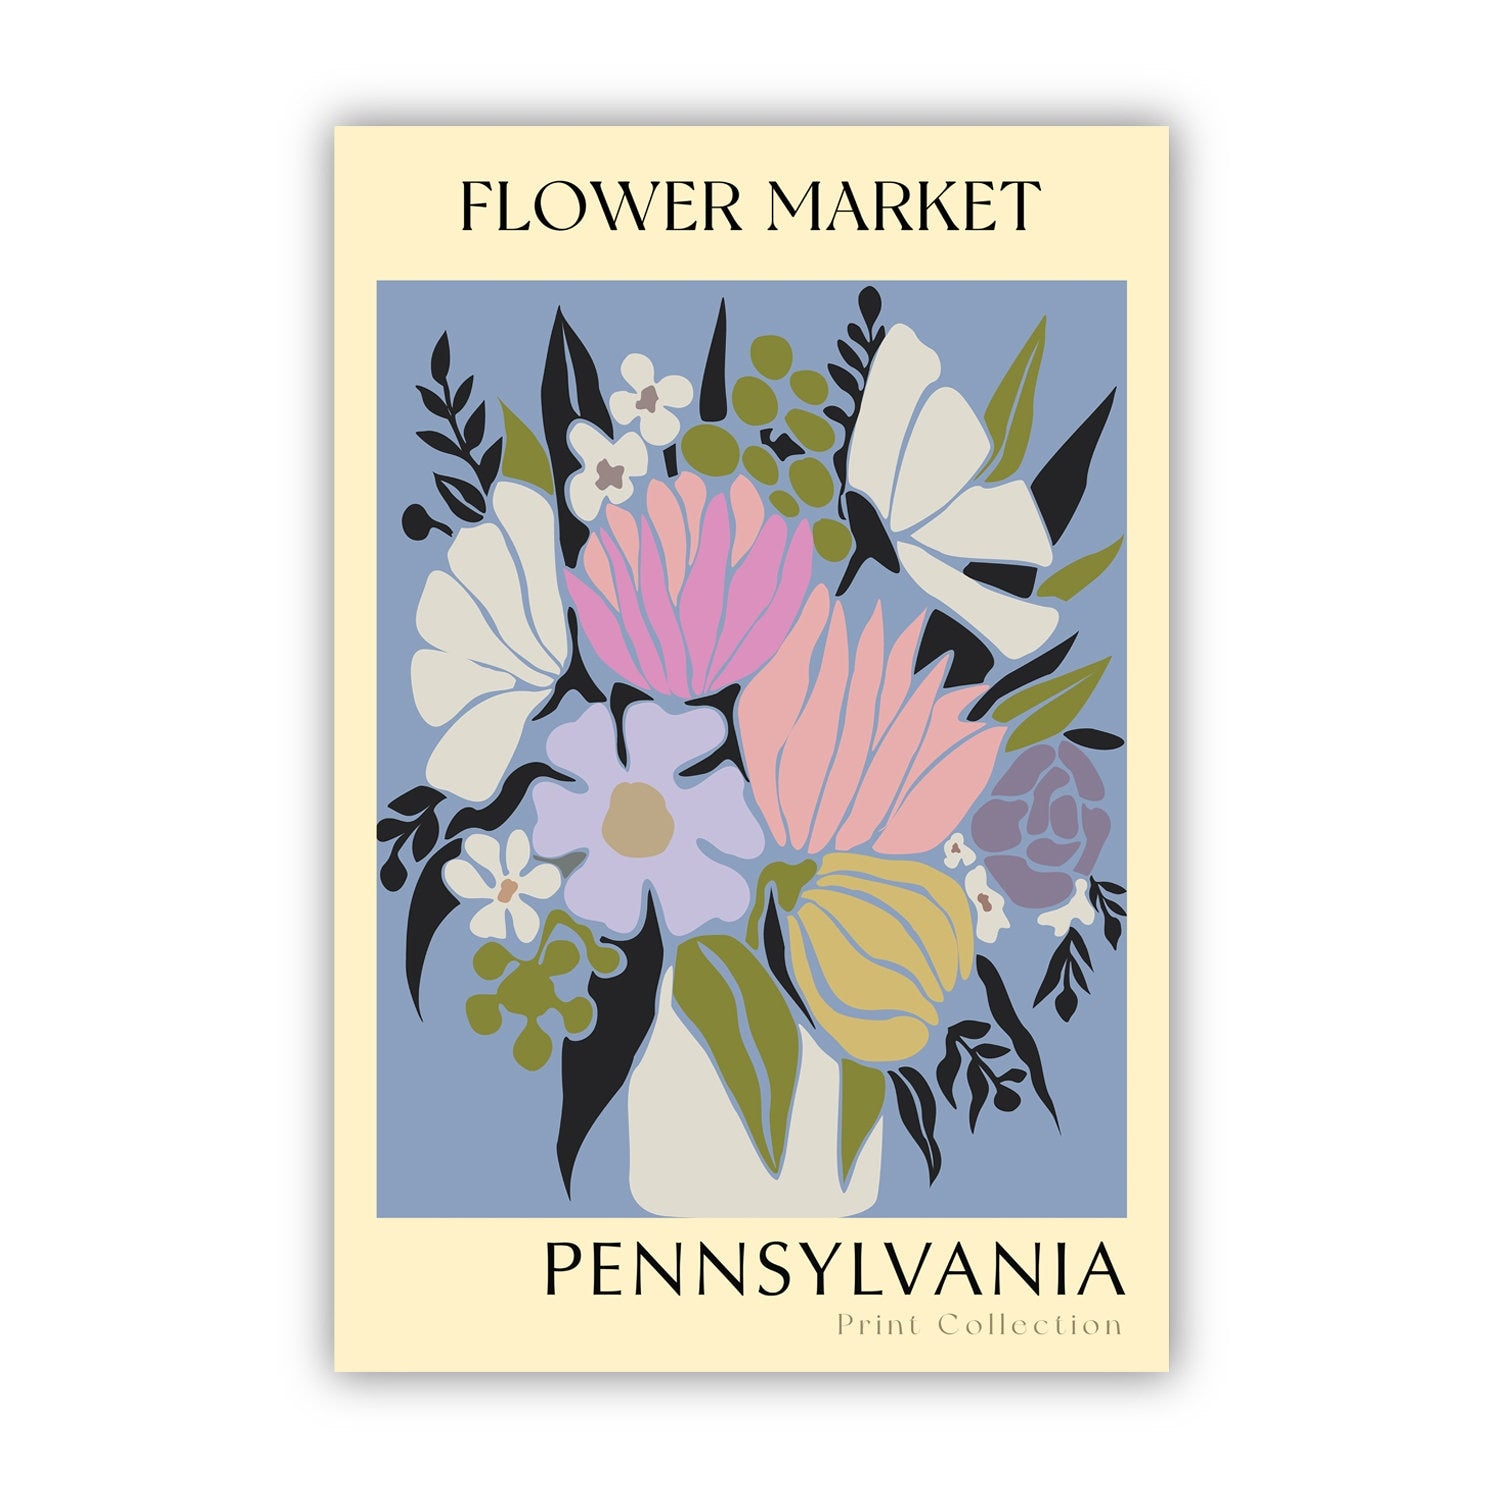 Pennsylvania State flower print, States poster, Pennsylvania flower market poster, Botanical posters, Nature poster artwork, Floral wall art